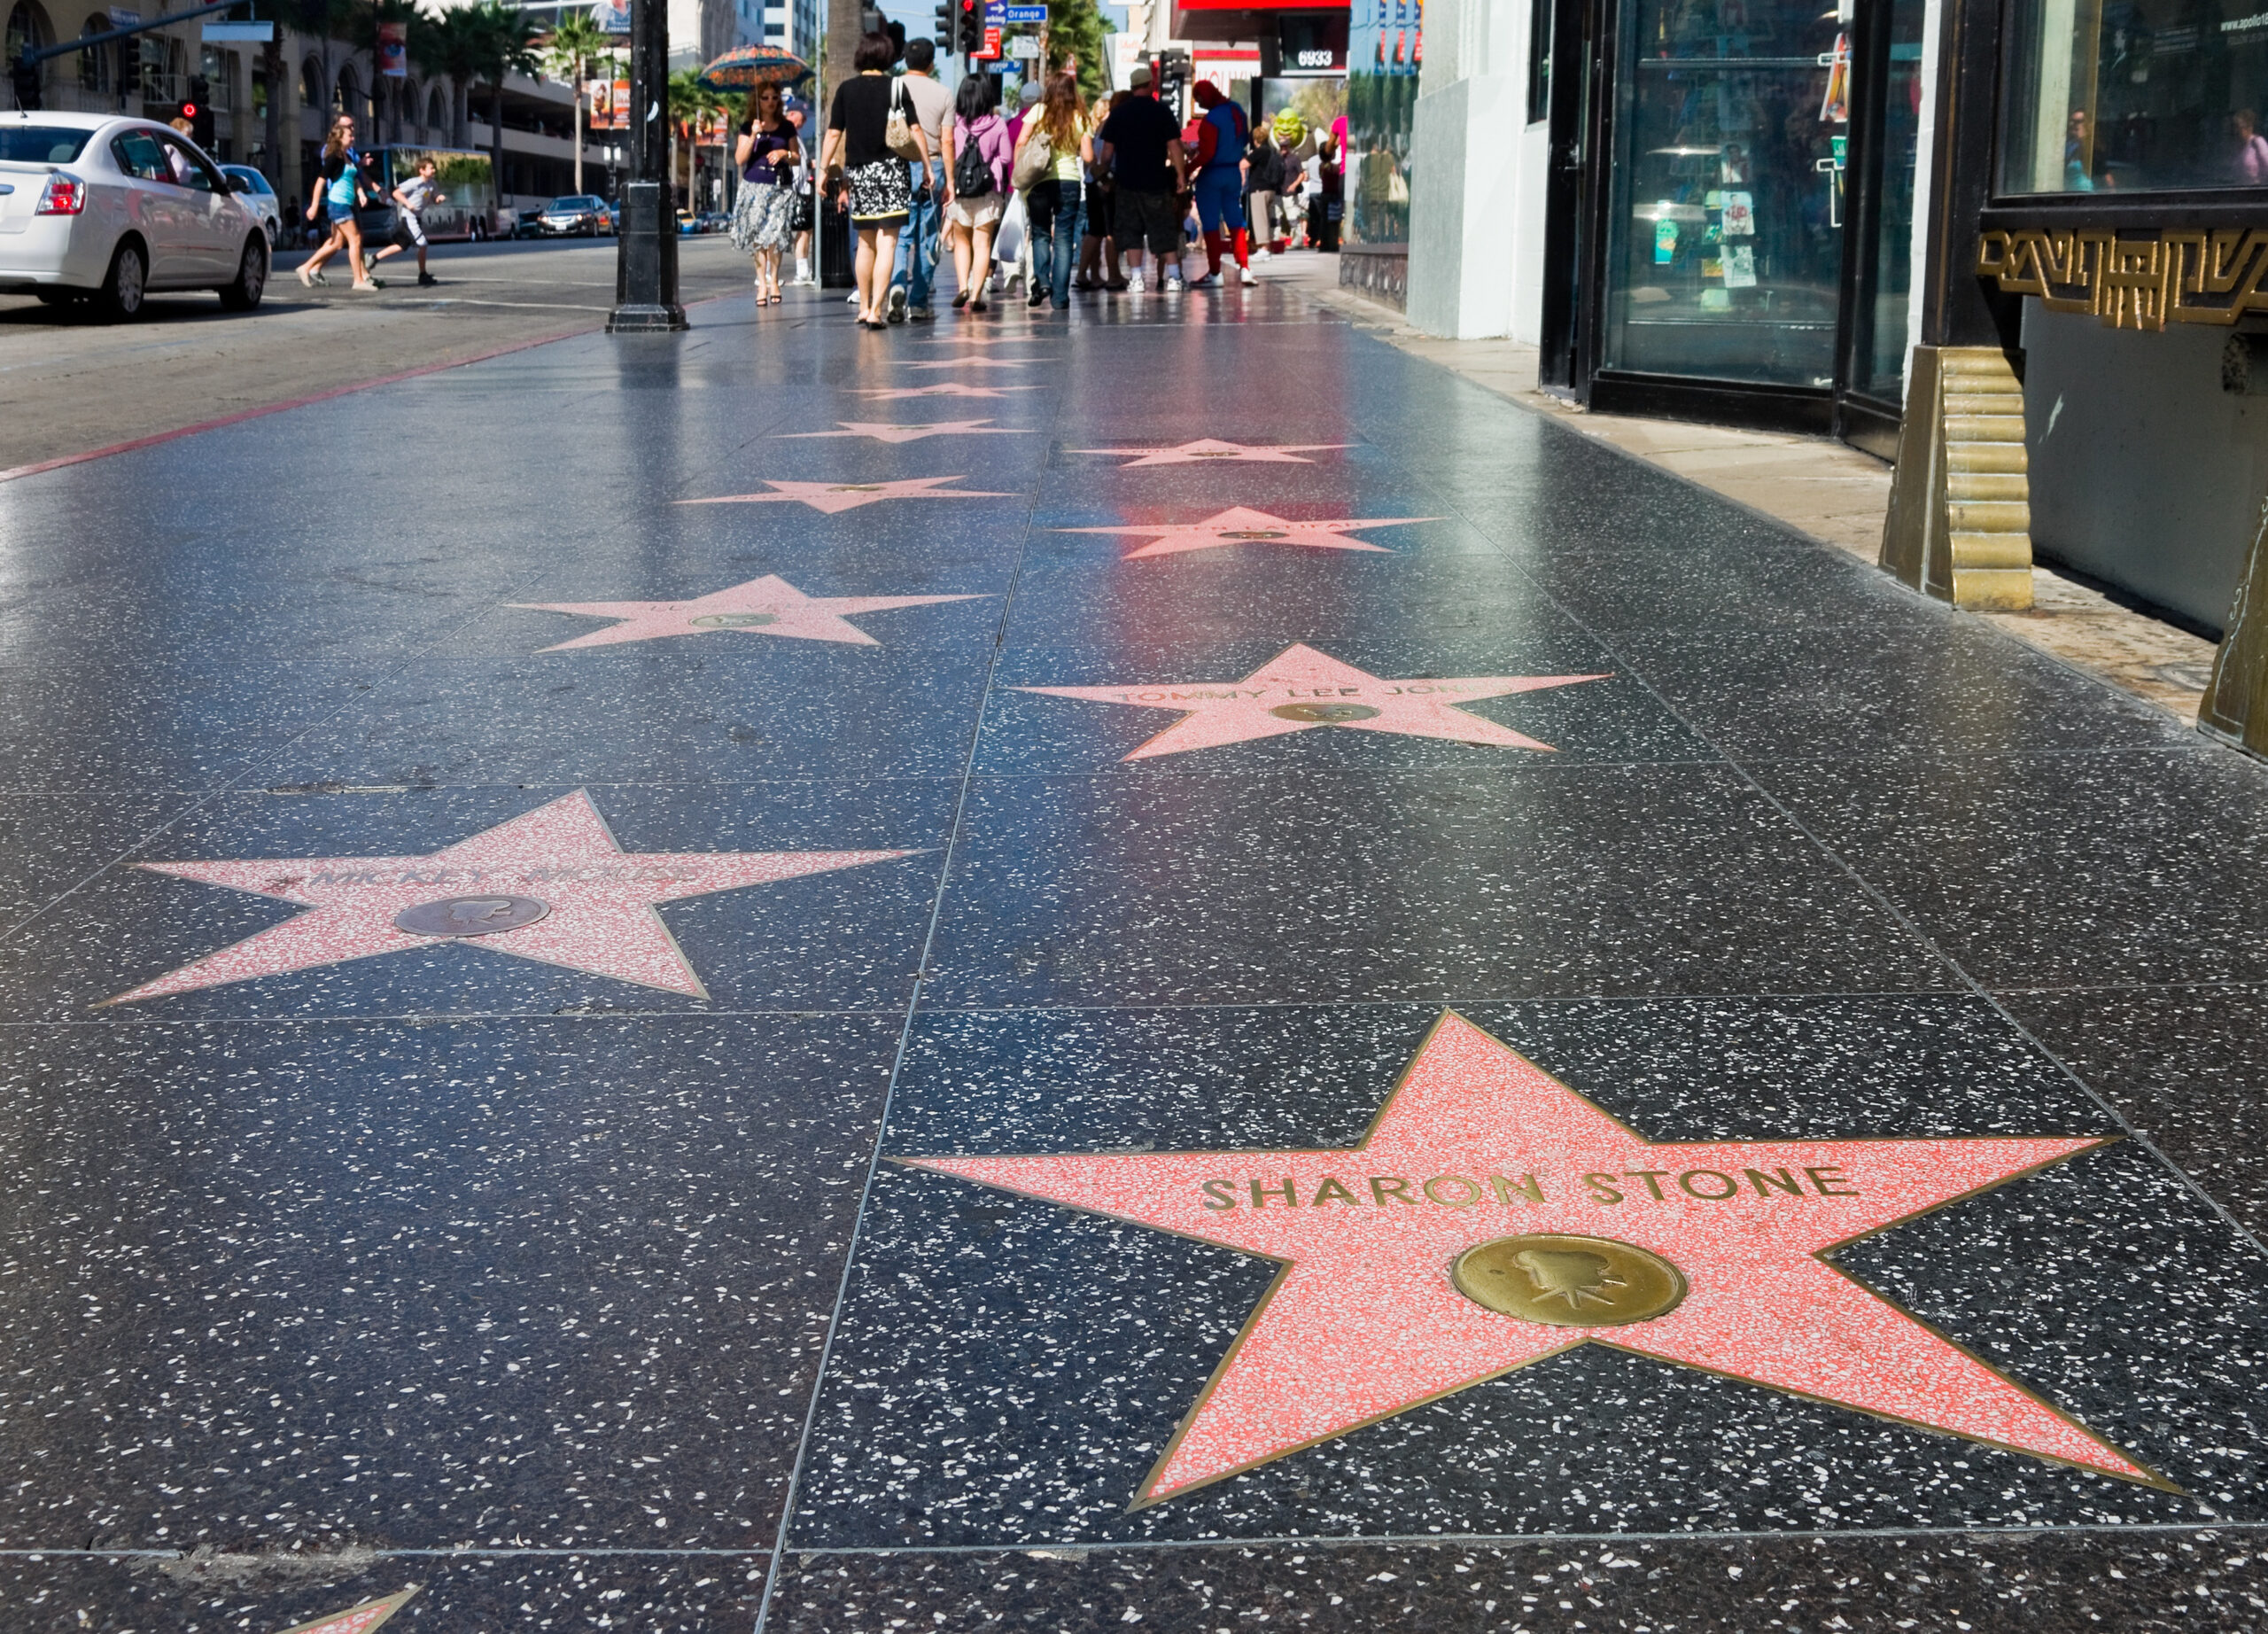 2. Hollywood Walk of Fame, Los Angeles